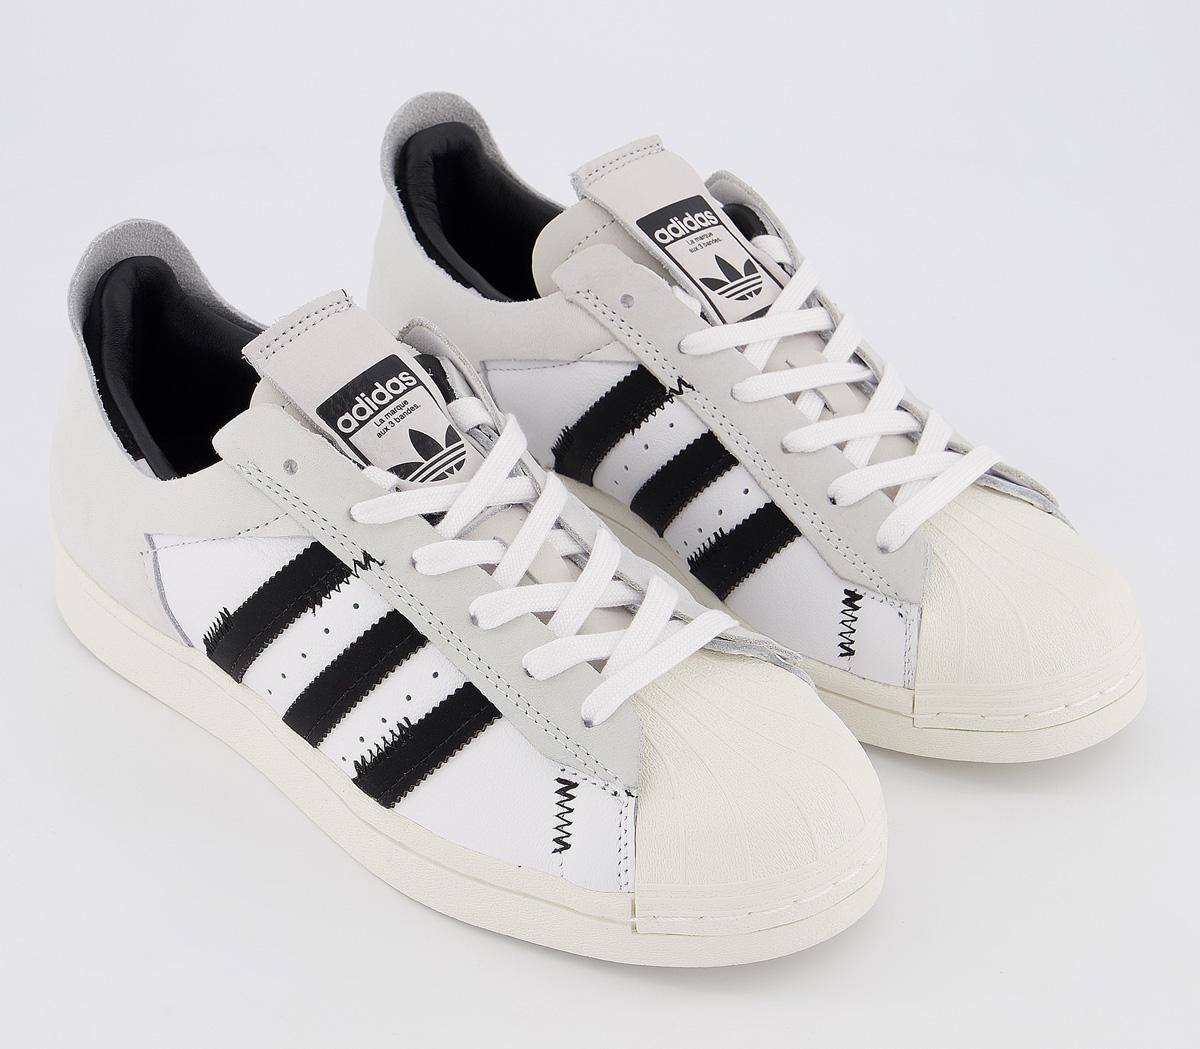 adidas Superstar Trainers White Core Black Off White - Unisex Sports